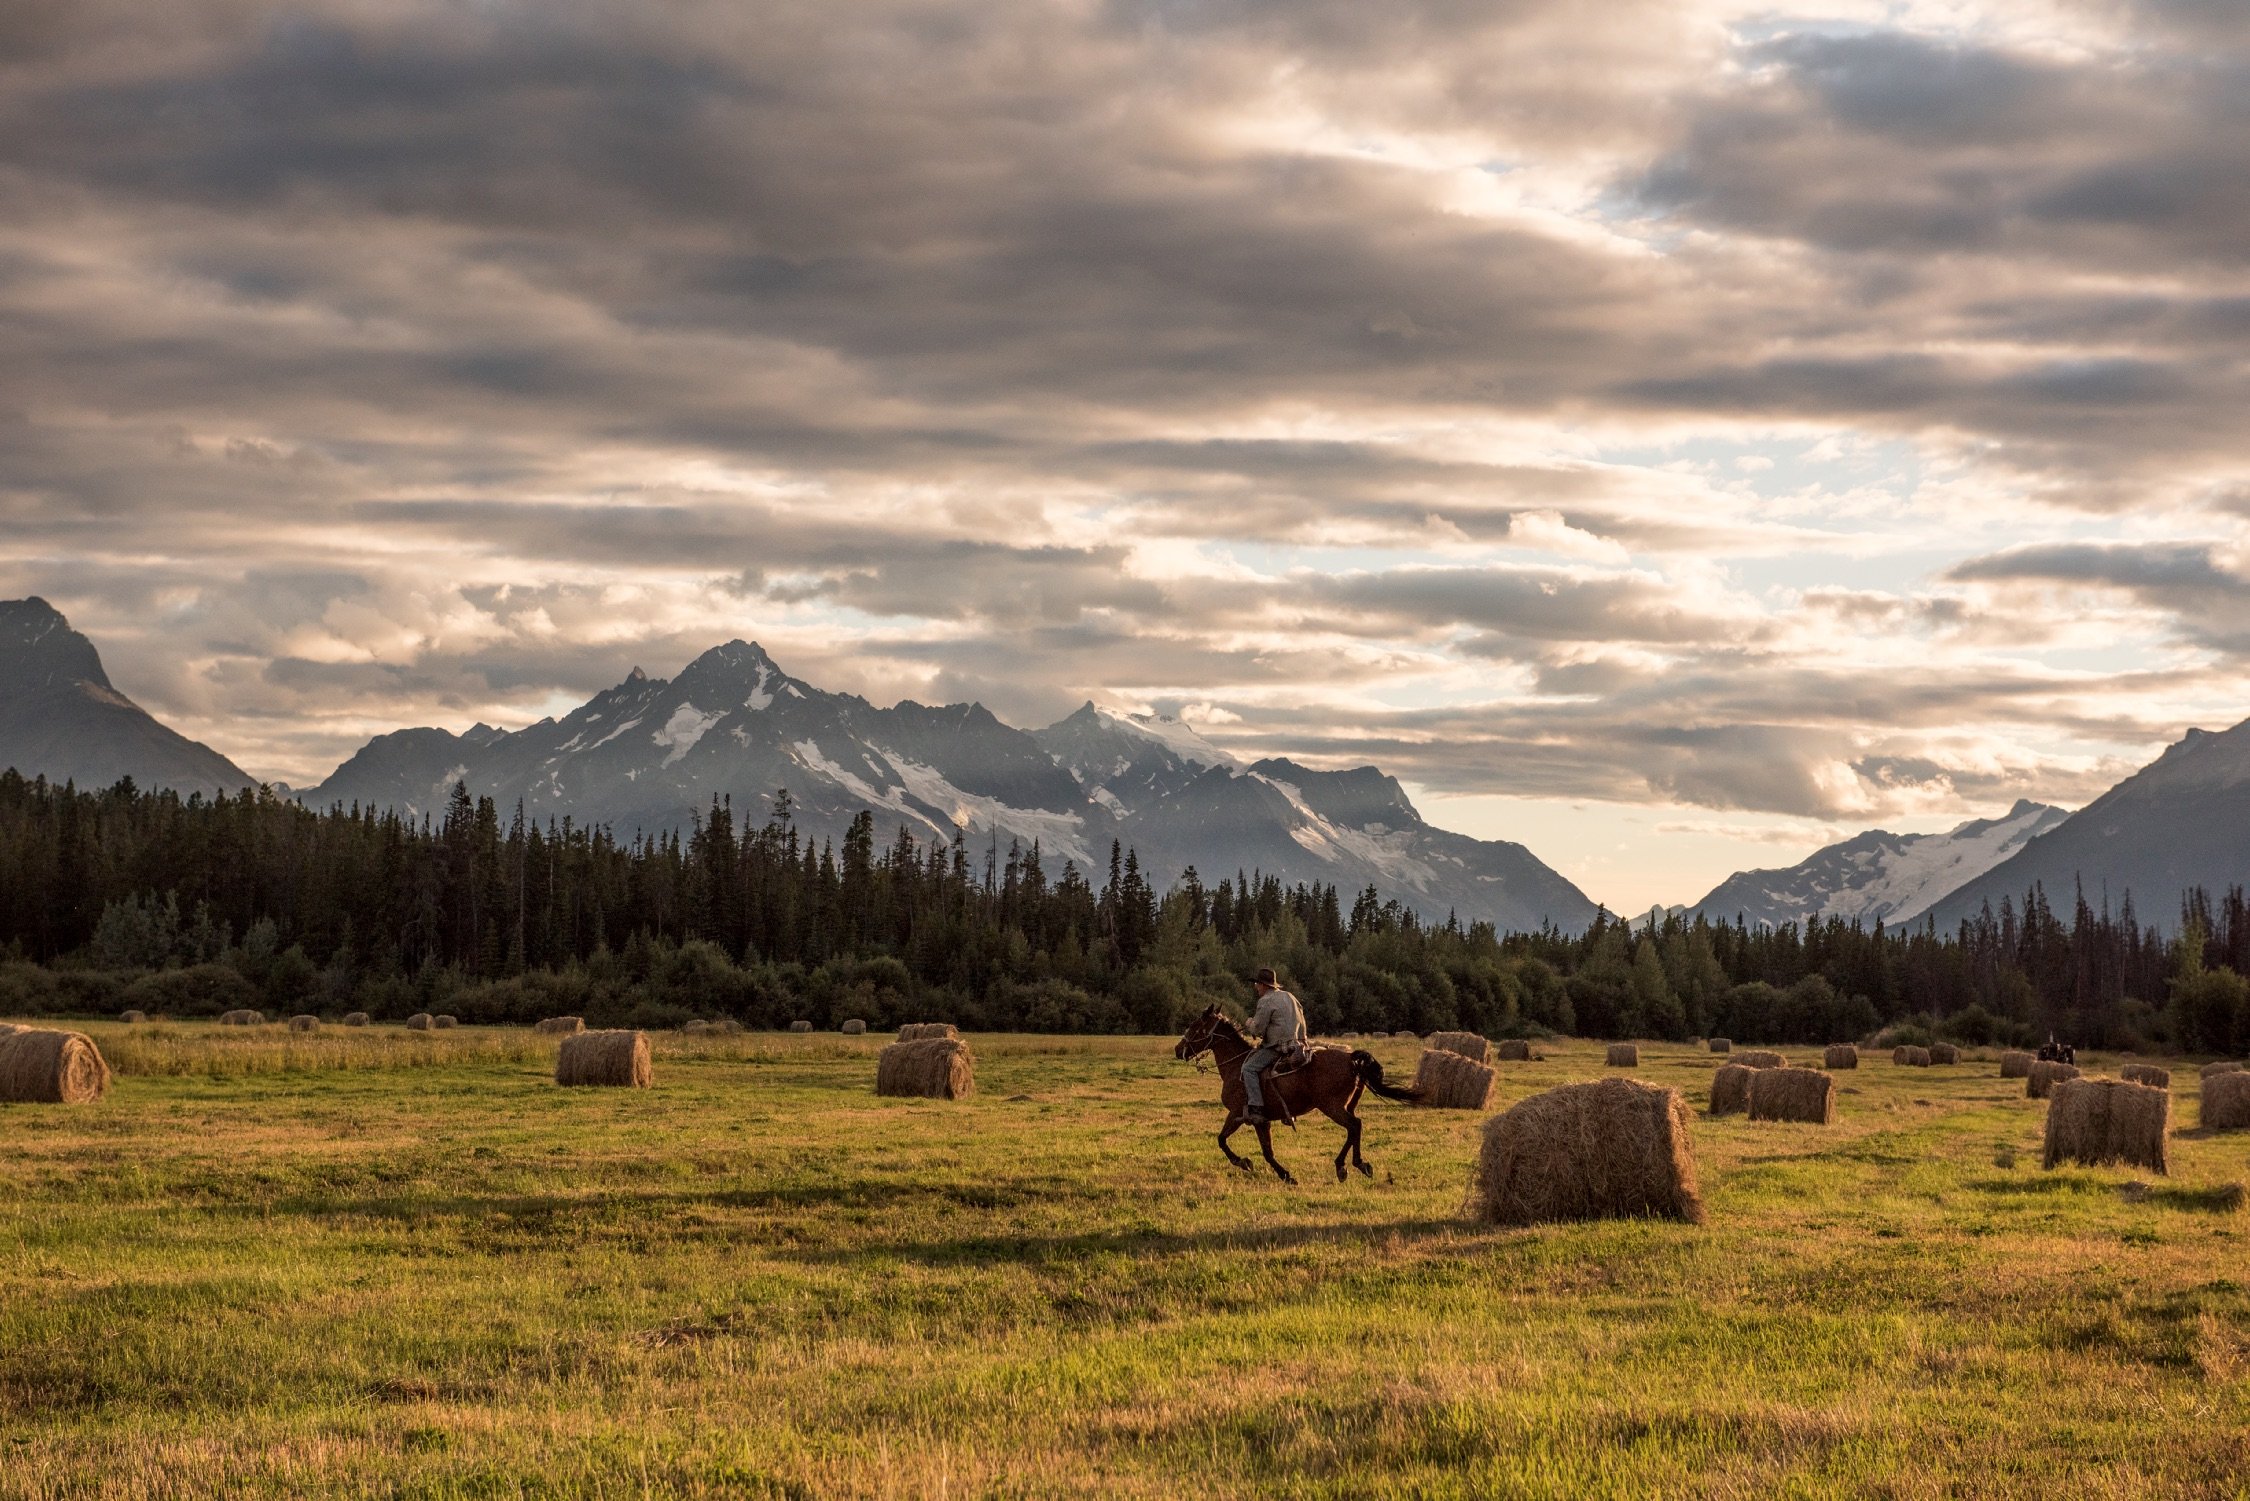 A man rides a horse across a field with mountains in the background